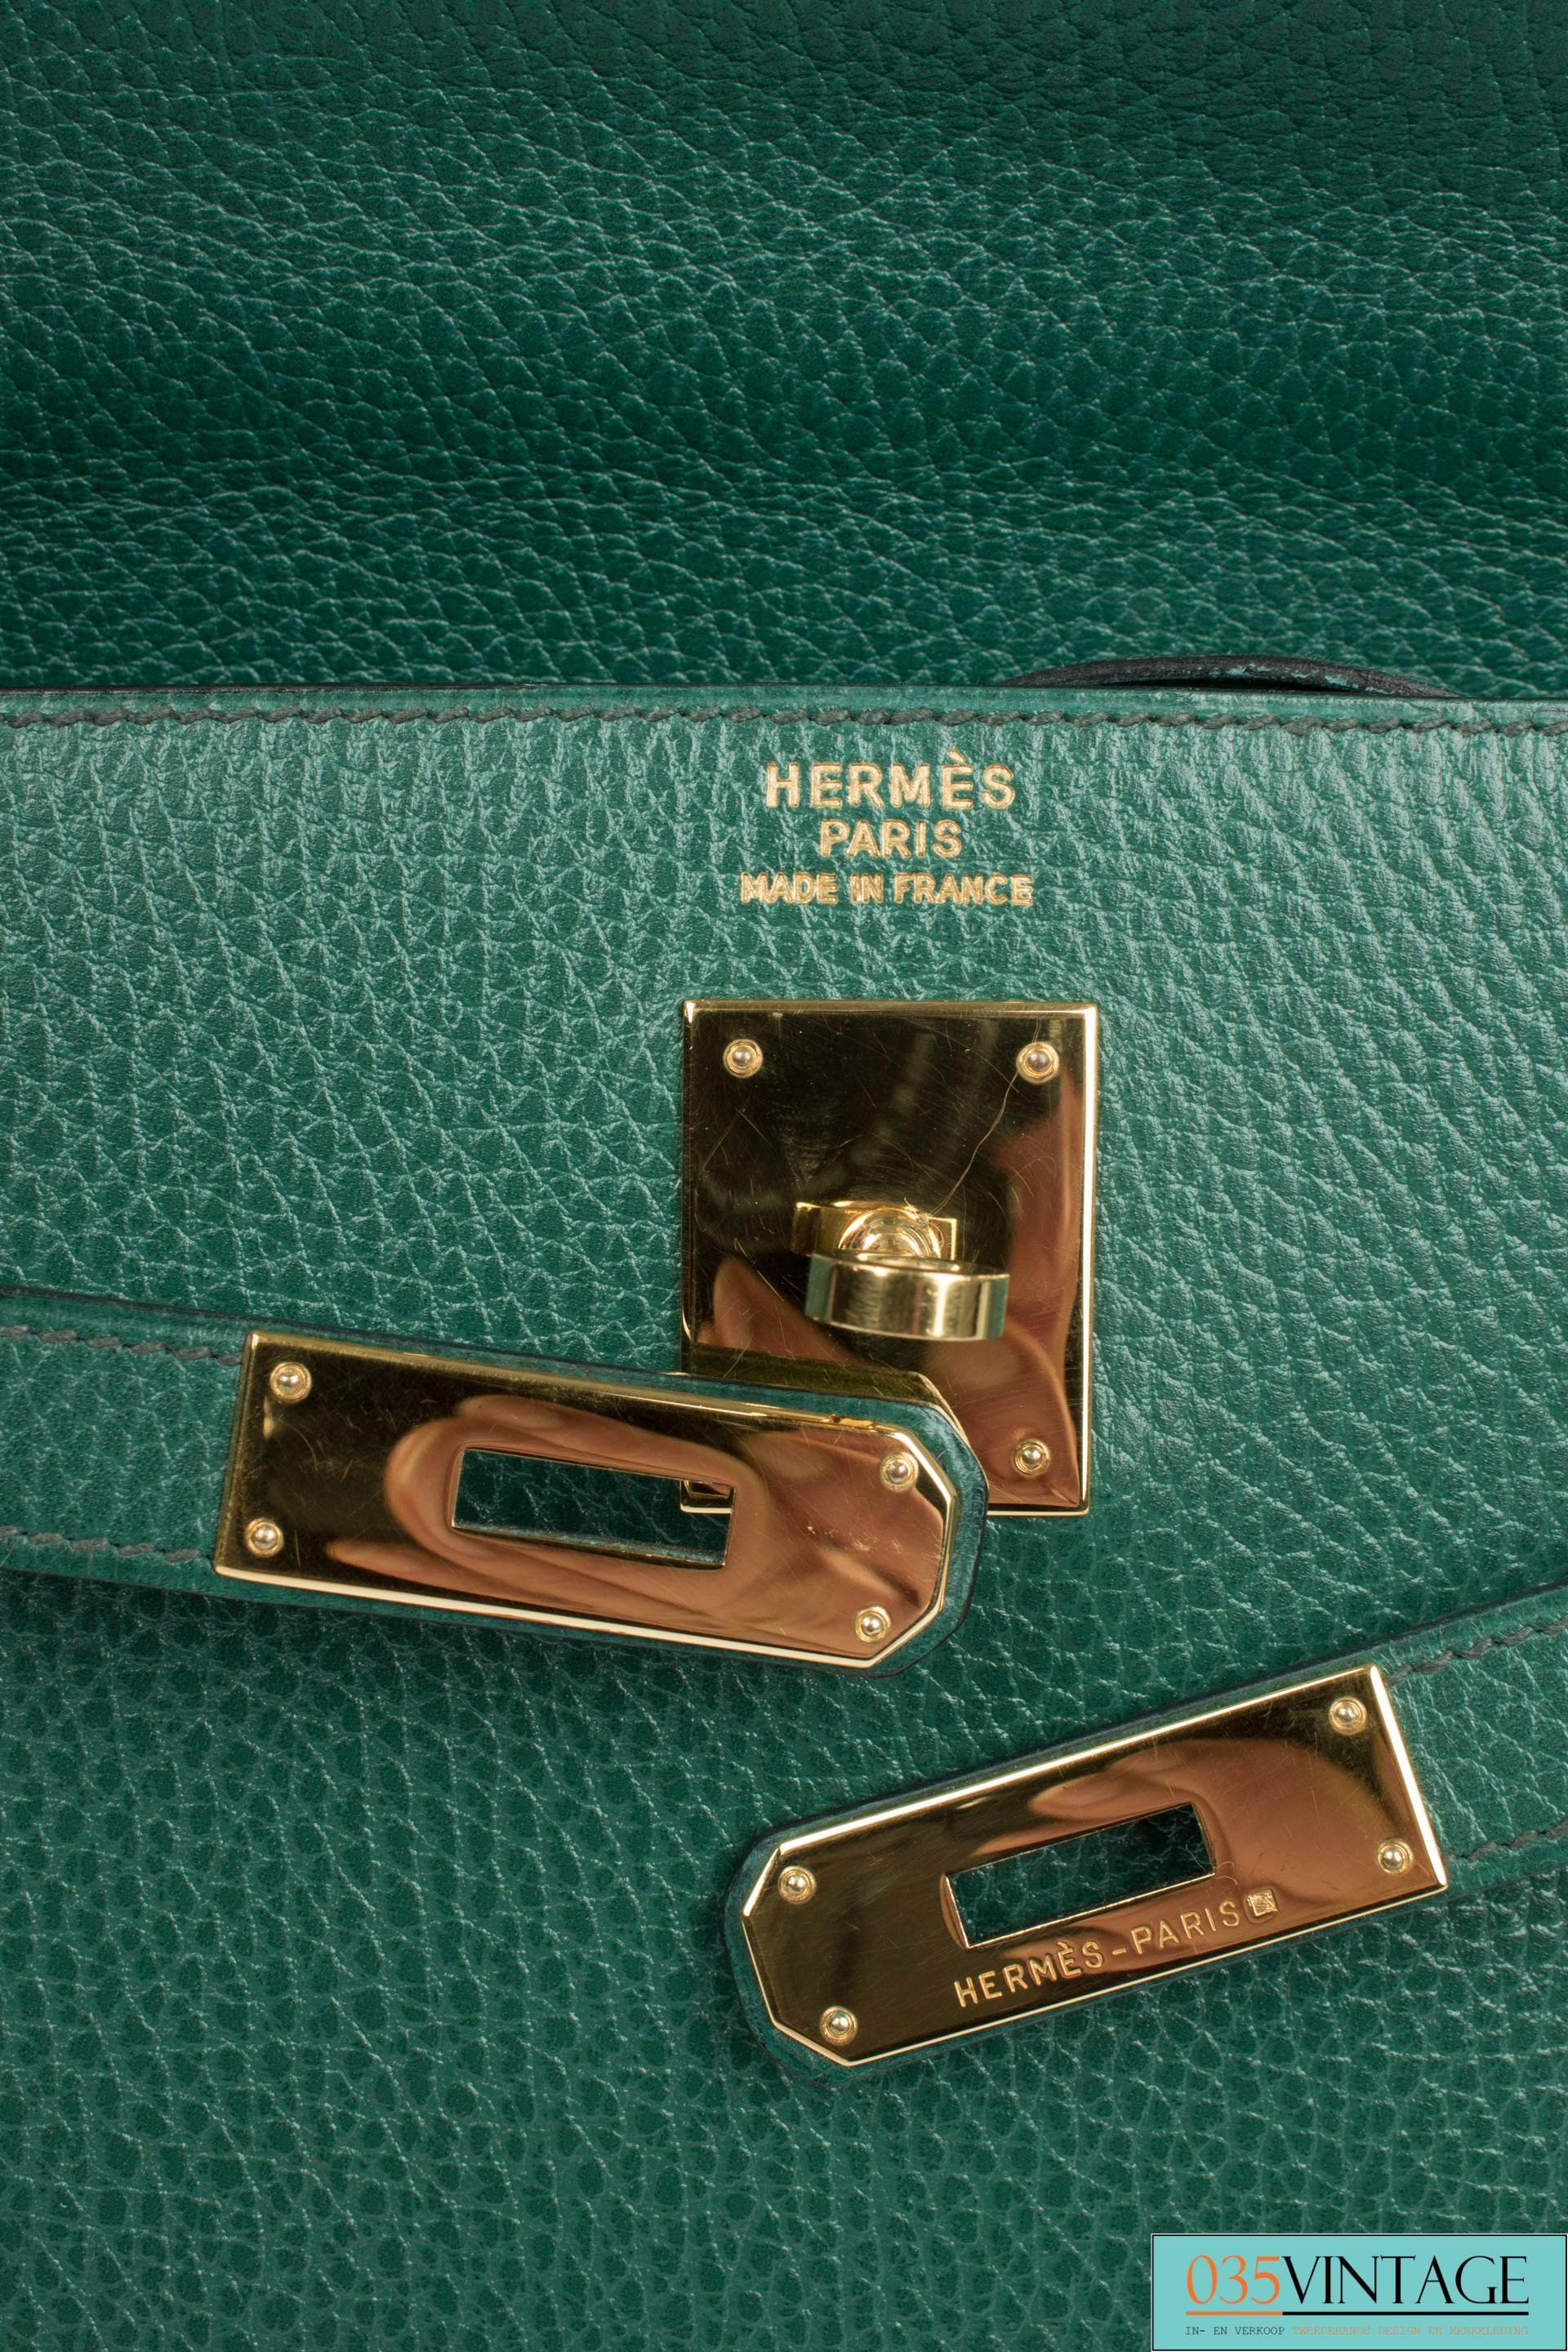 Yessss! Another beautiful Hermès bag in store! This is the Hermès Kelly Bag 35 in emerald green, we are in love!

This is a true collector's item. Every bag is handcrafted in France and has numerous characteristics. We cannot mention them all, but